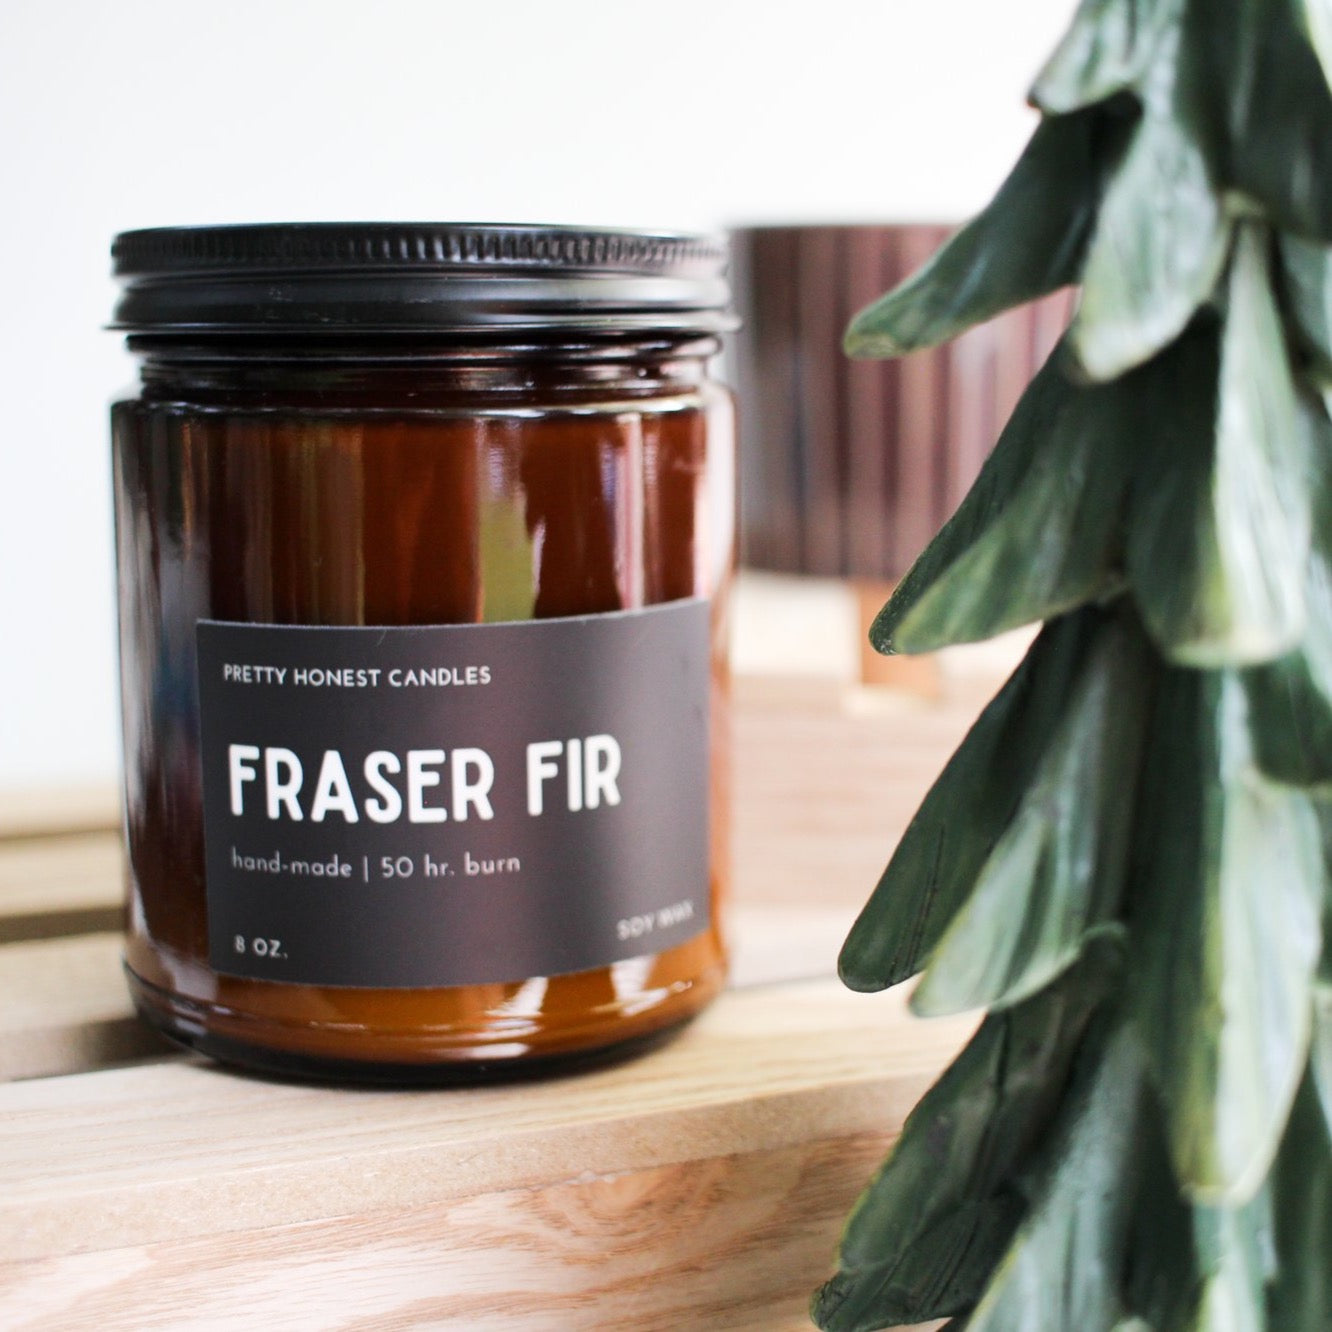 Fraser Fir Soy Candle - Amber Collection - Pretty Honest Candles